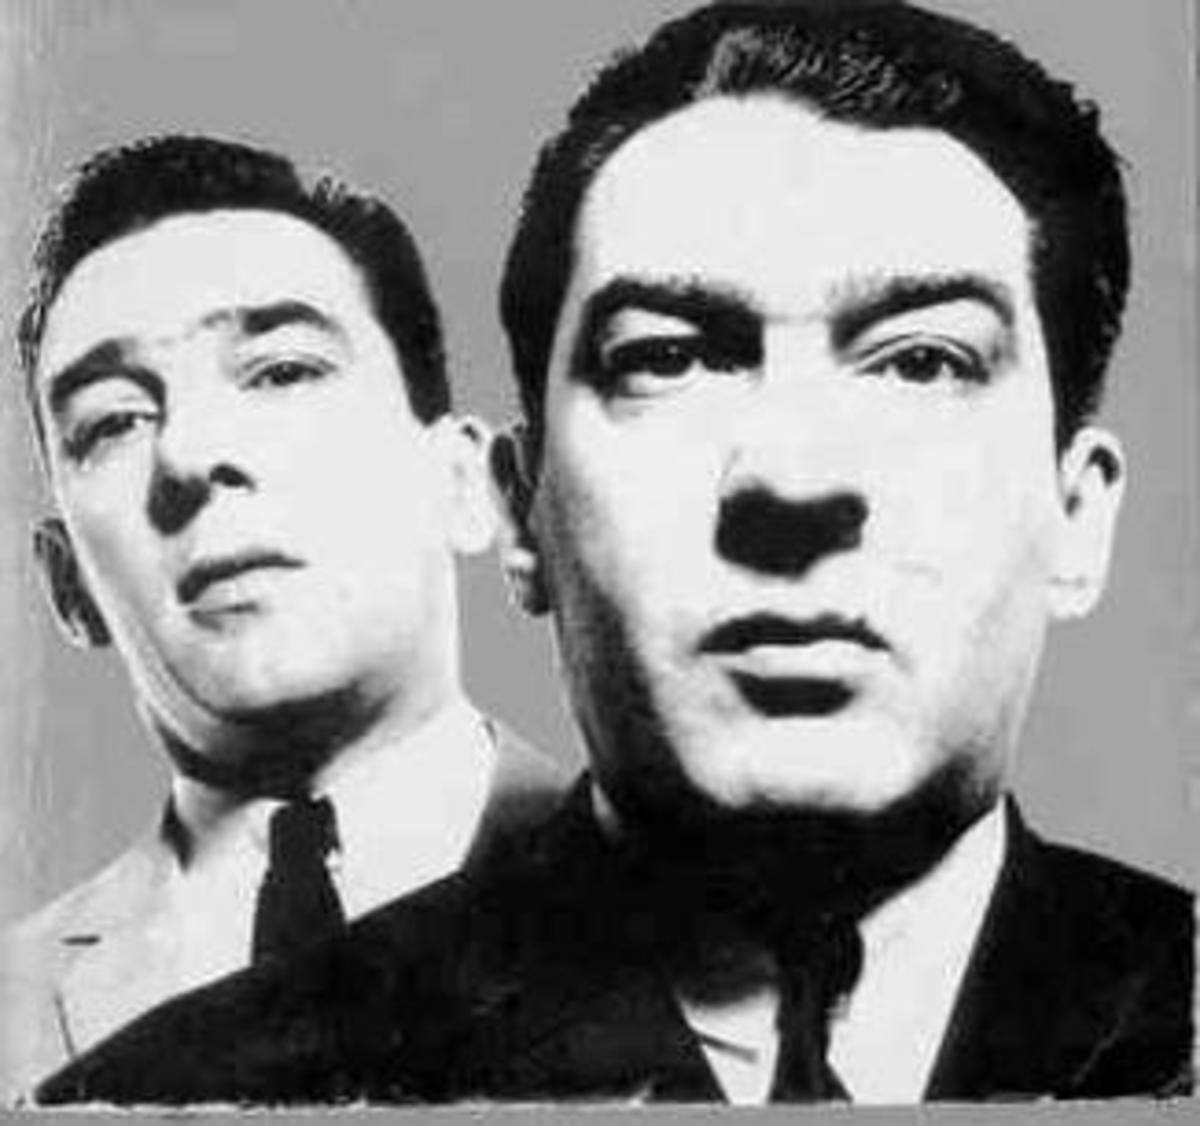 Reggie (left) and Ronnie in an image taken by famed photographer David Bailey. He captured the brooding malevolence of the pair.